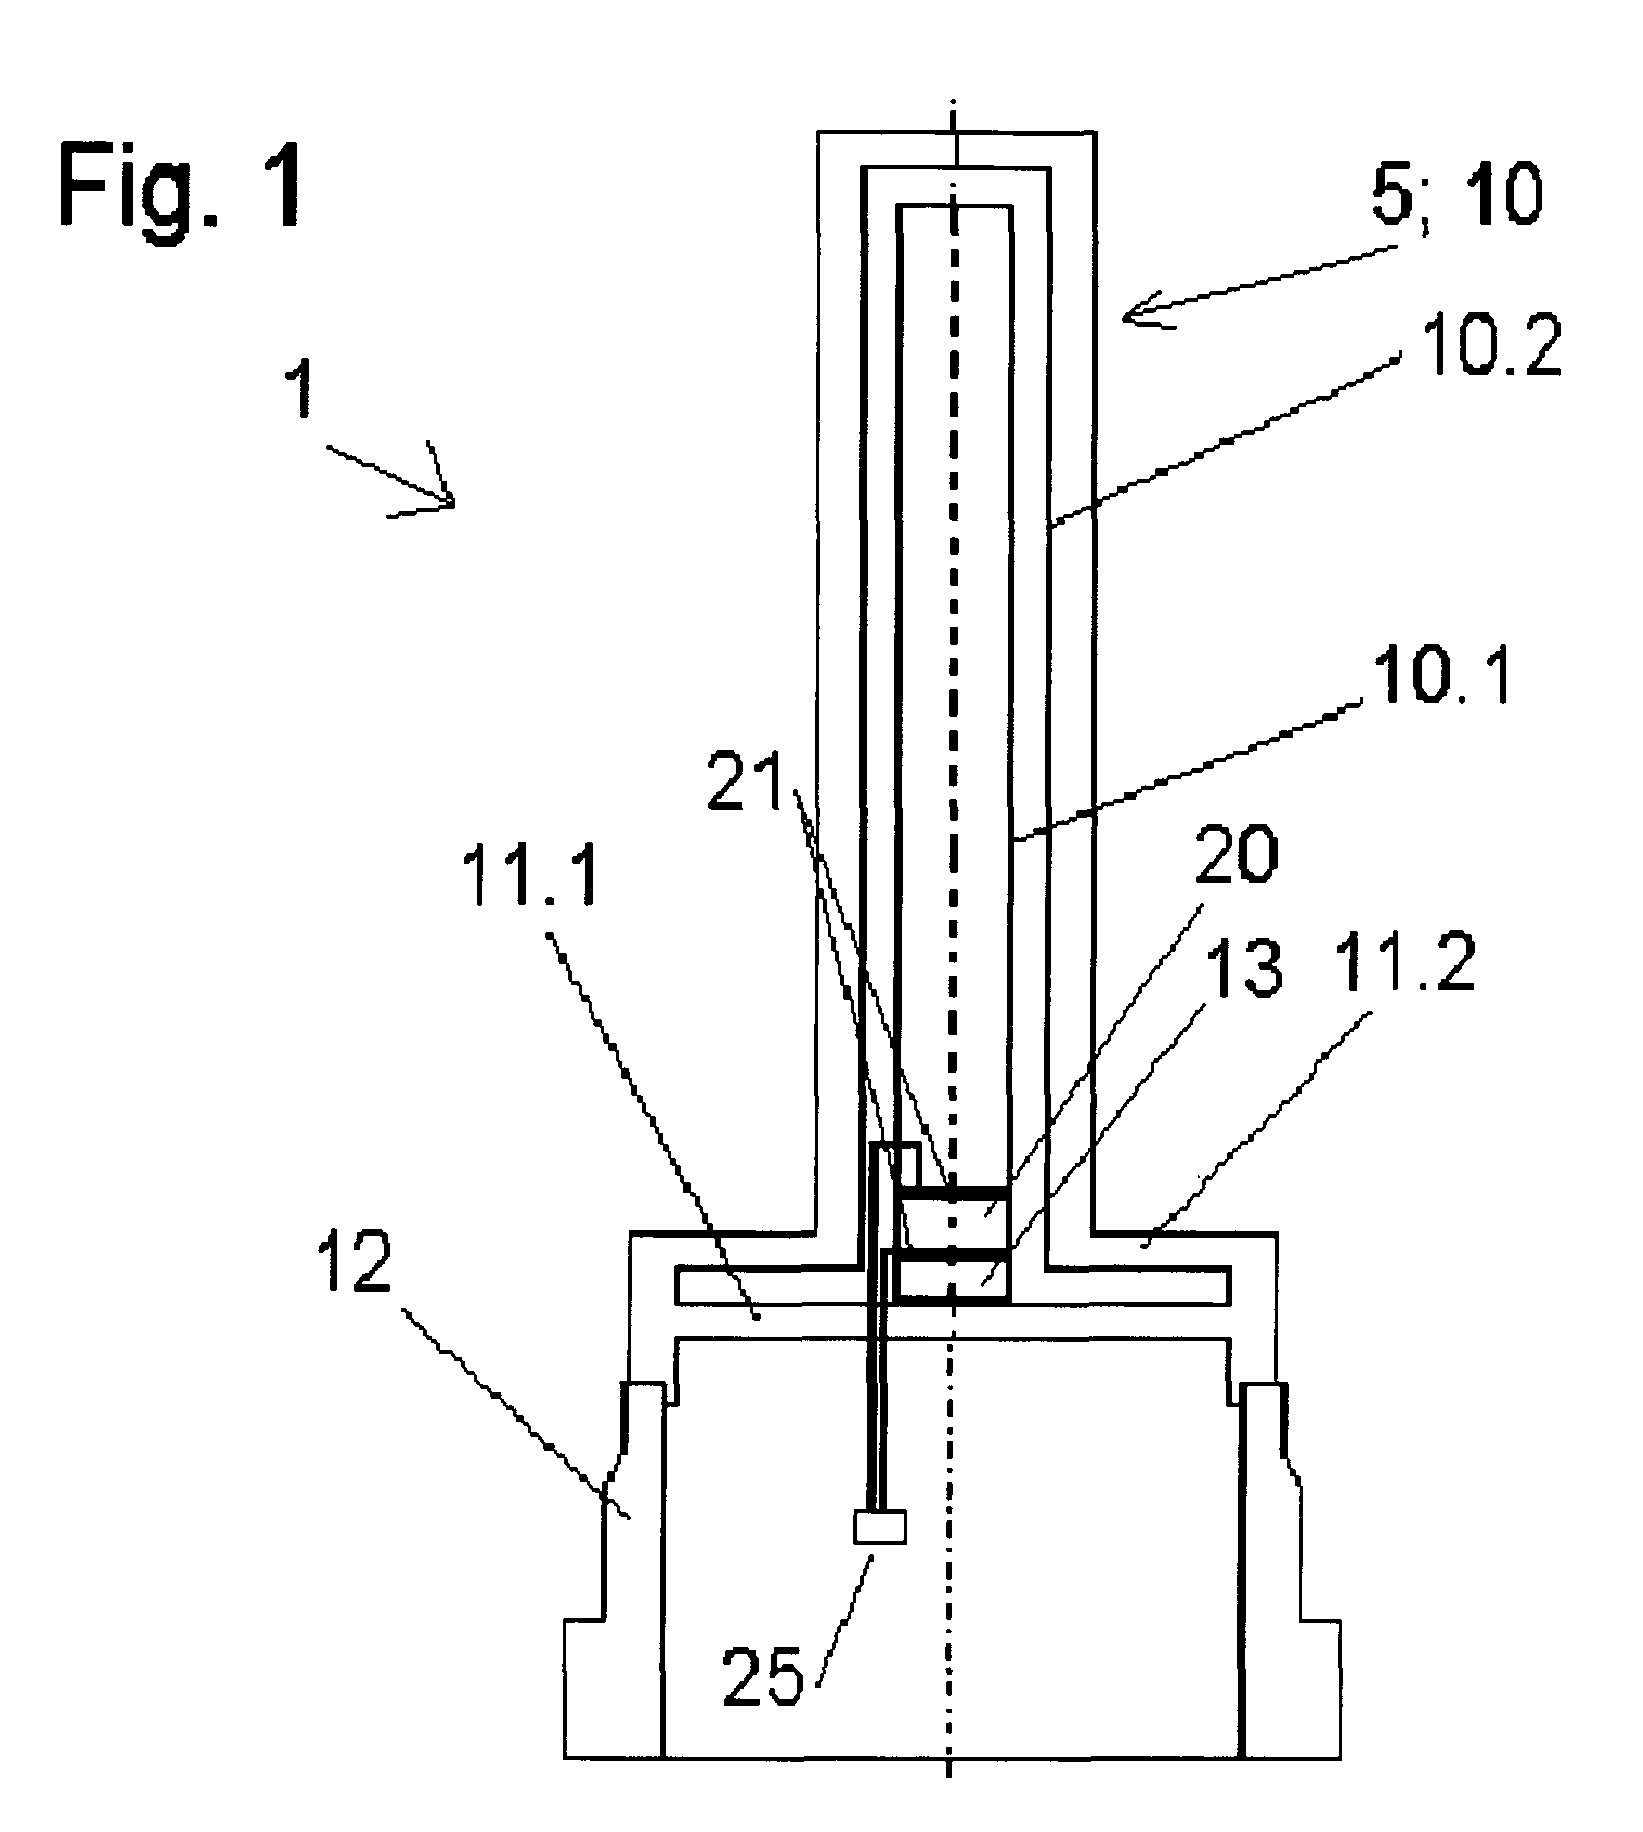 Apparatus for determining and/or monitoring a process variable